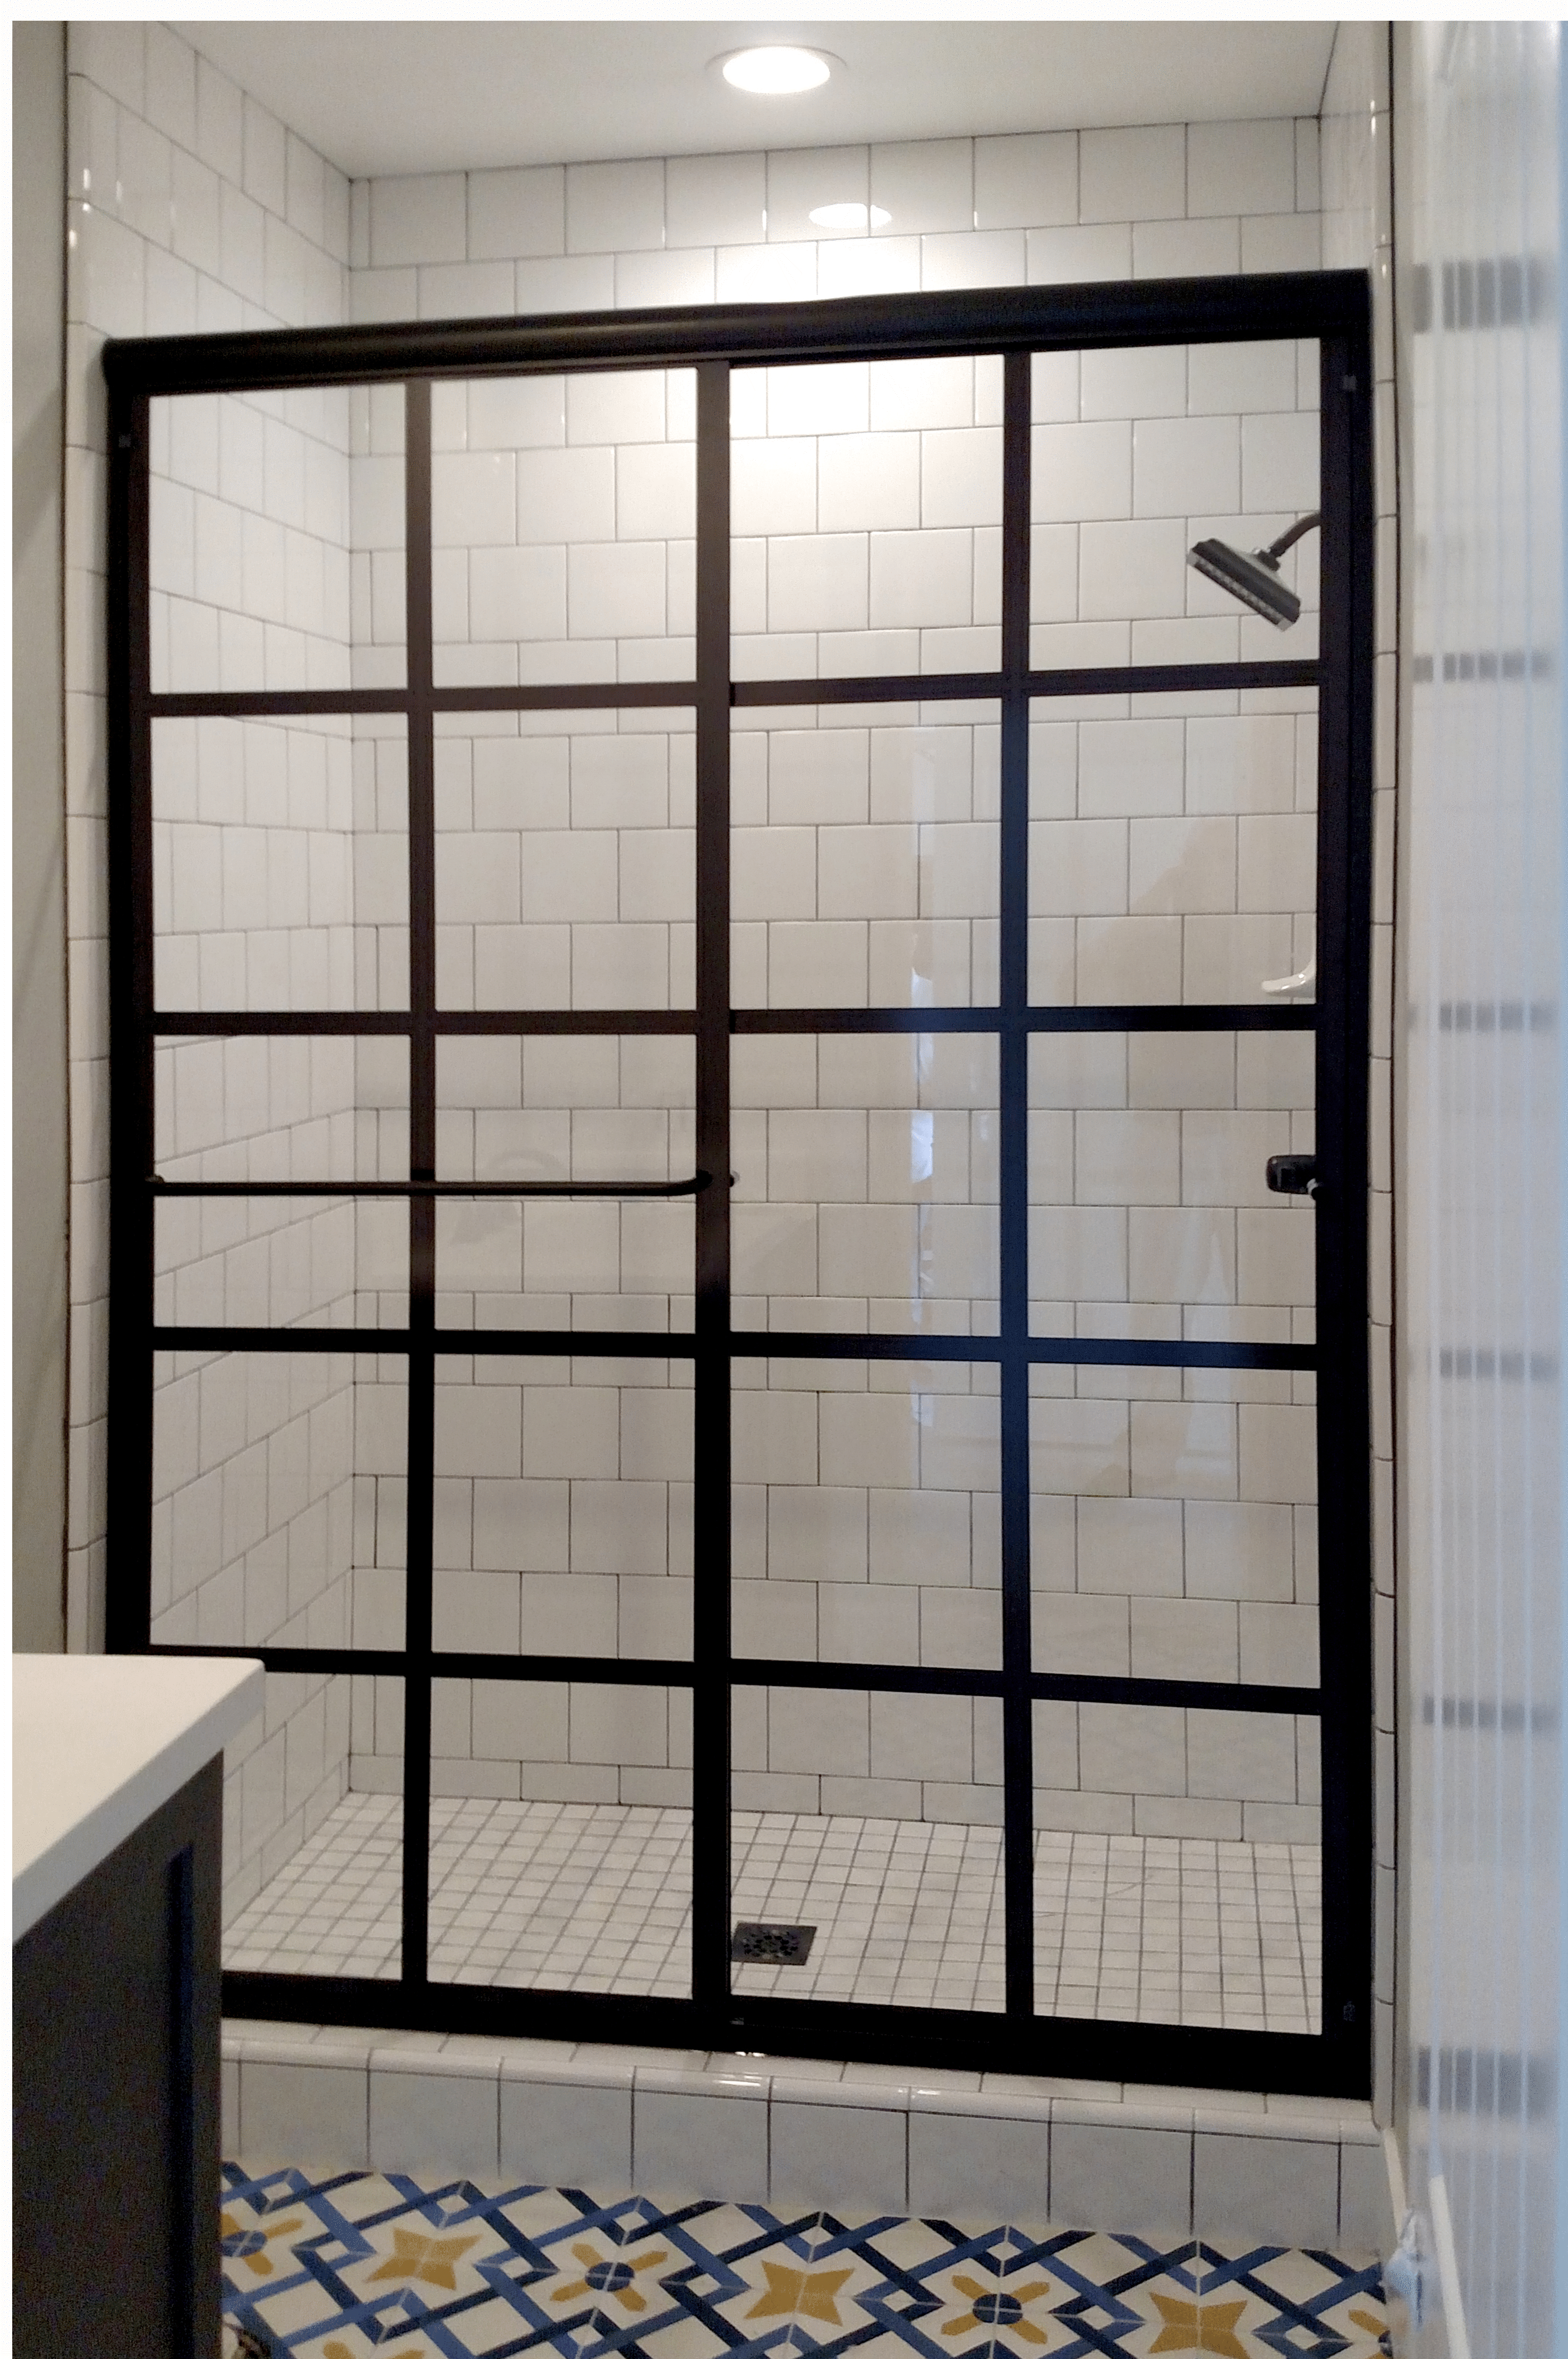 Agalite Hd Glass And Gridtech Agalite Shower Bath Enclosures in size 2952 X 4440